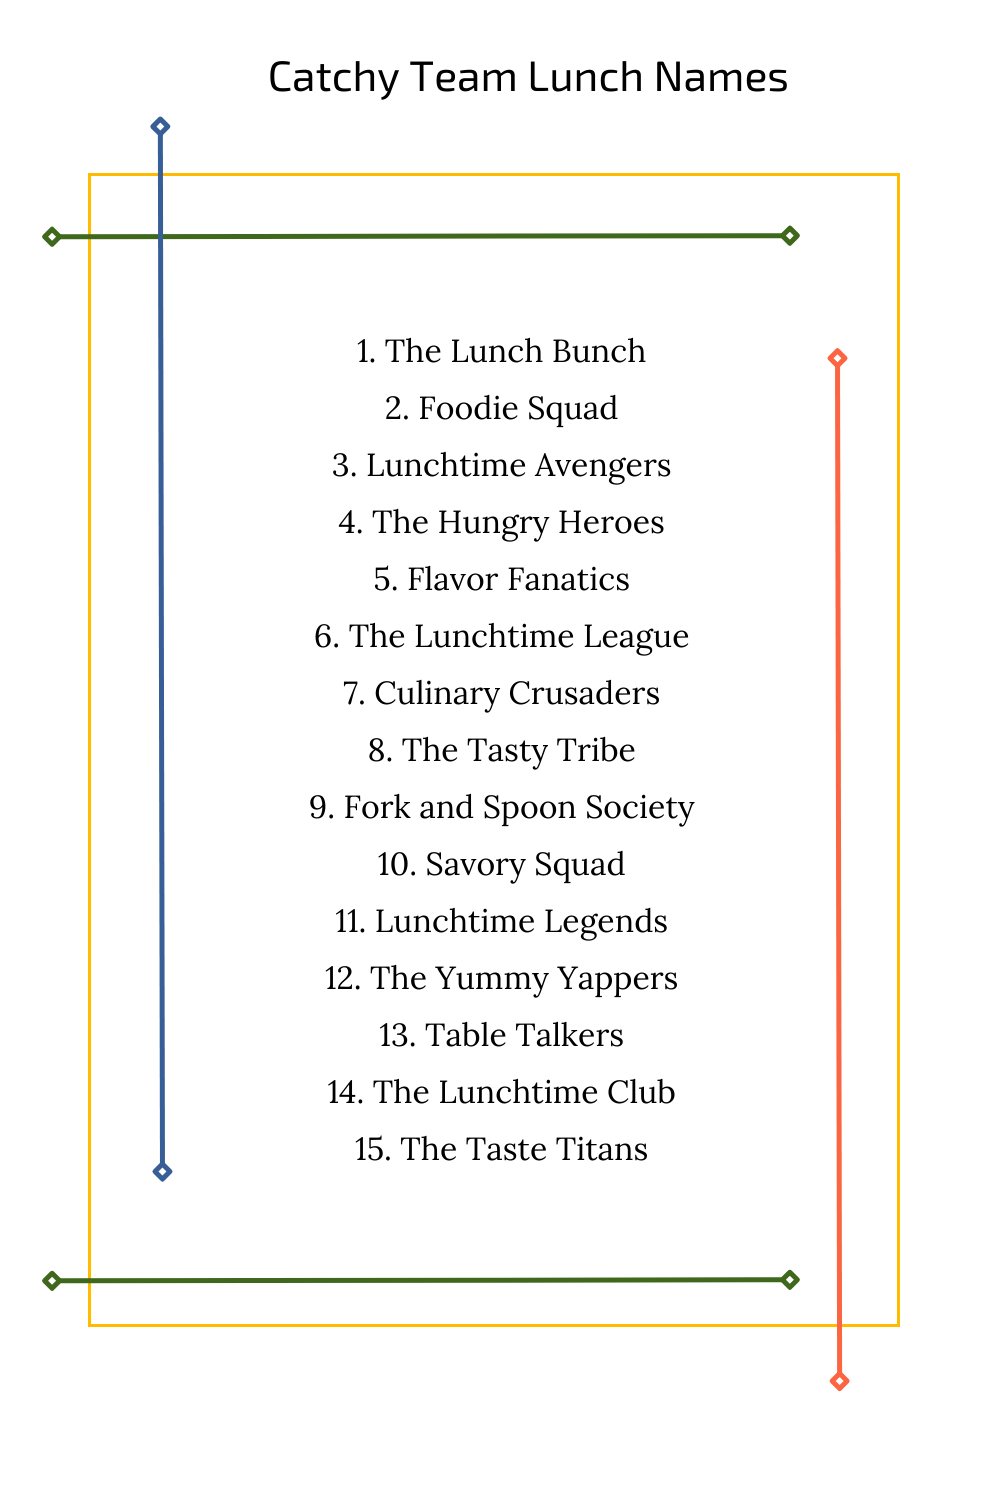 Catchy Team Lunch Names